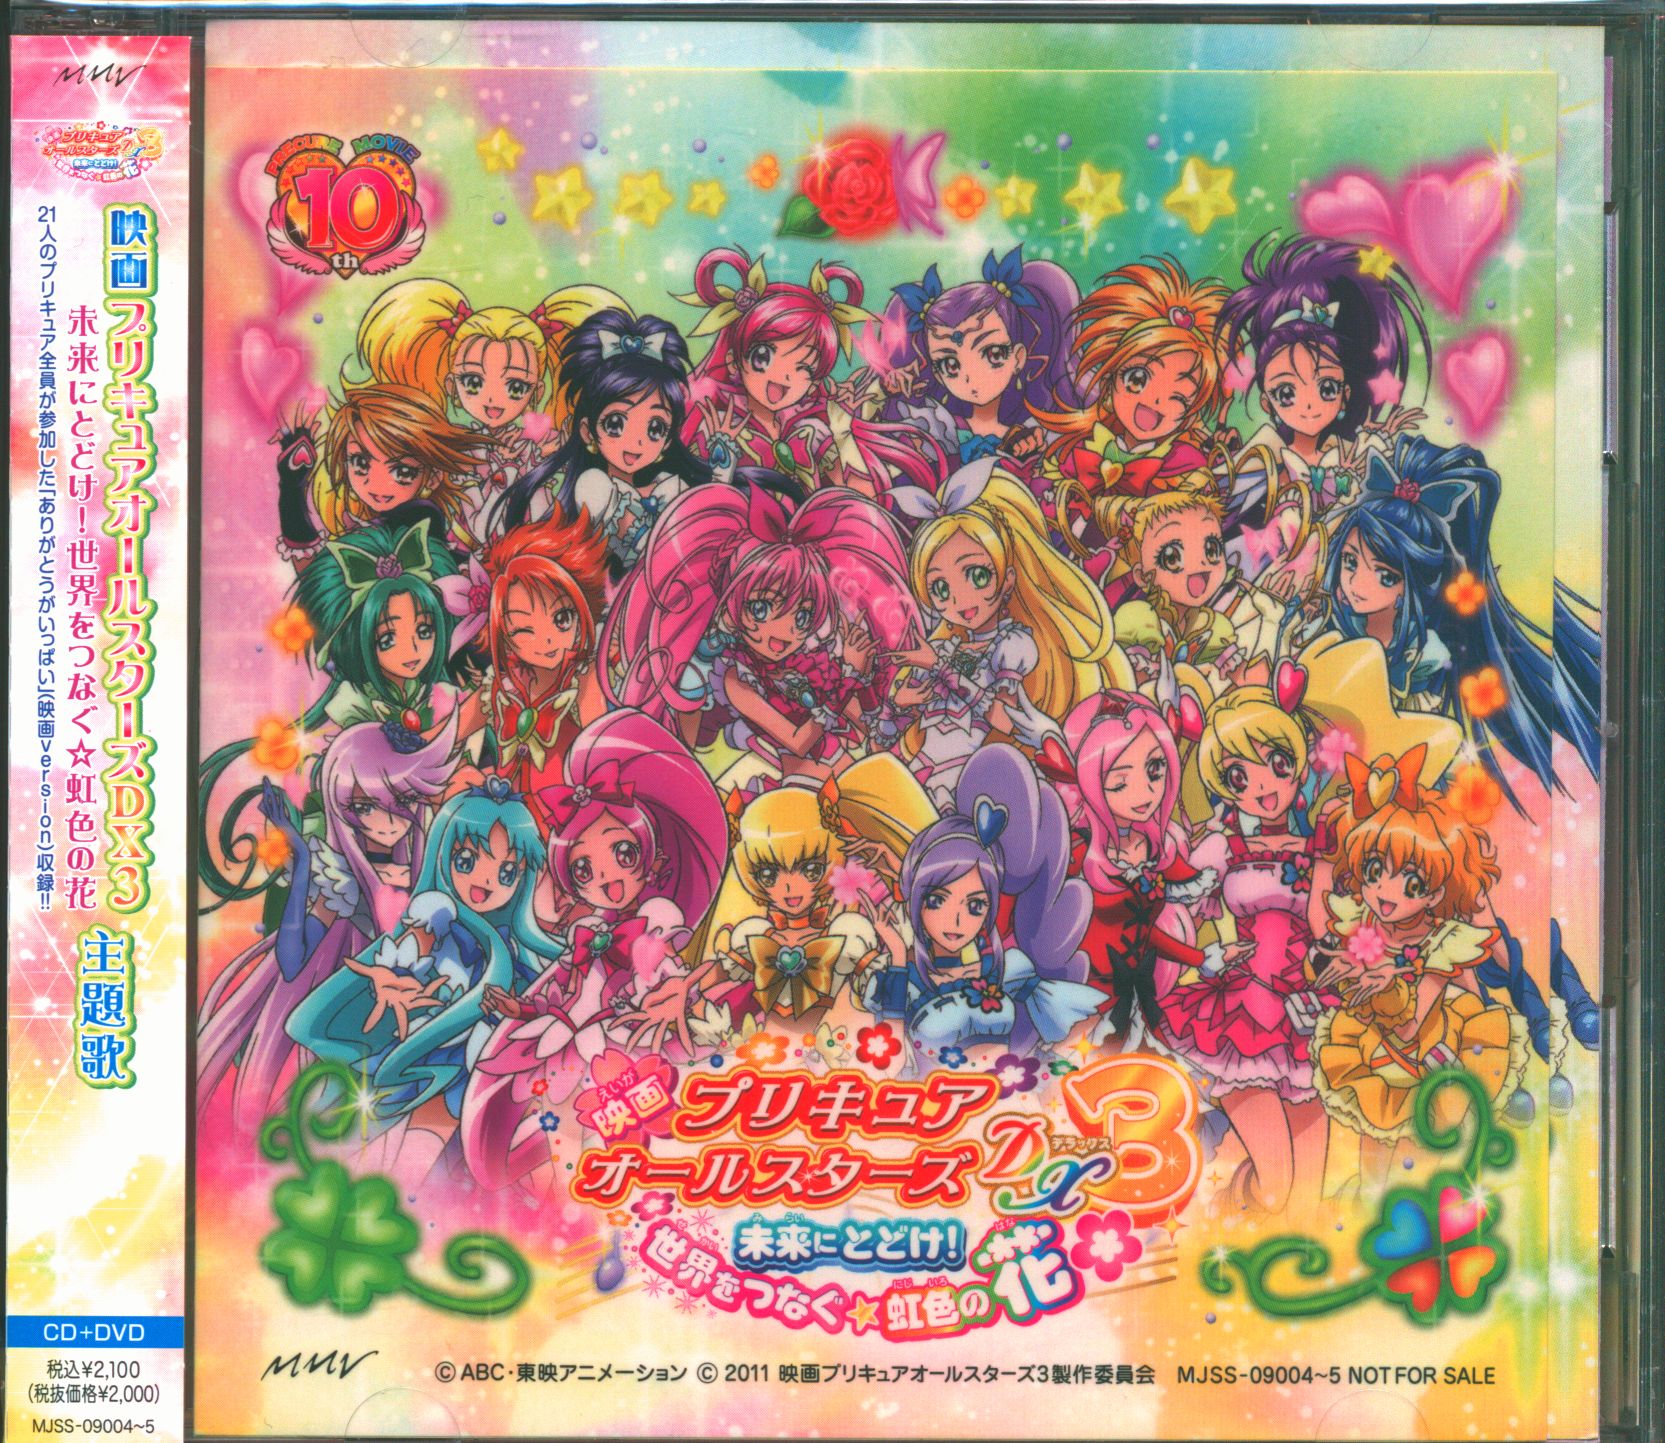 Connecting delivered Save to Precure All-Stars DX3 Mirai 